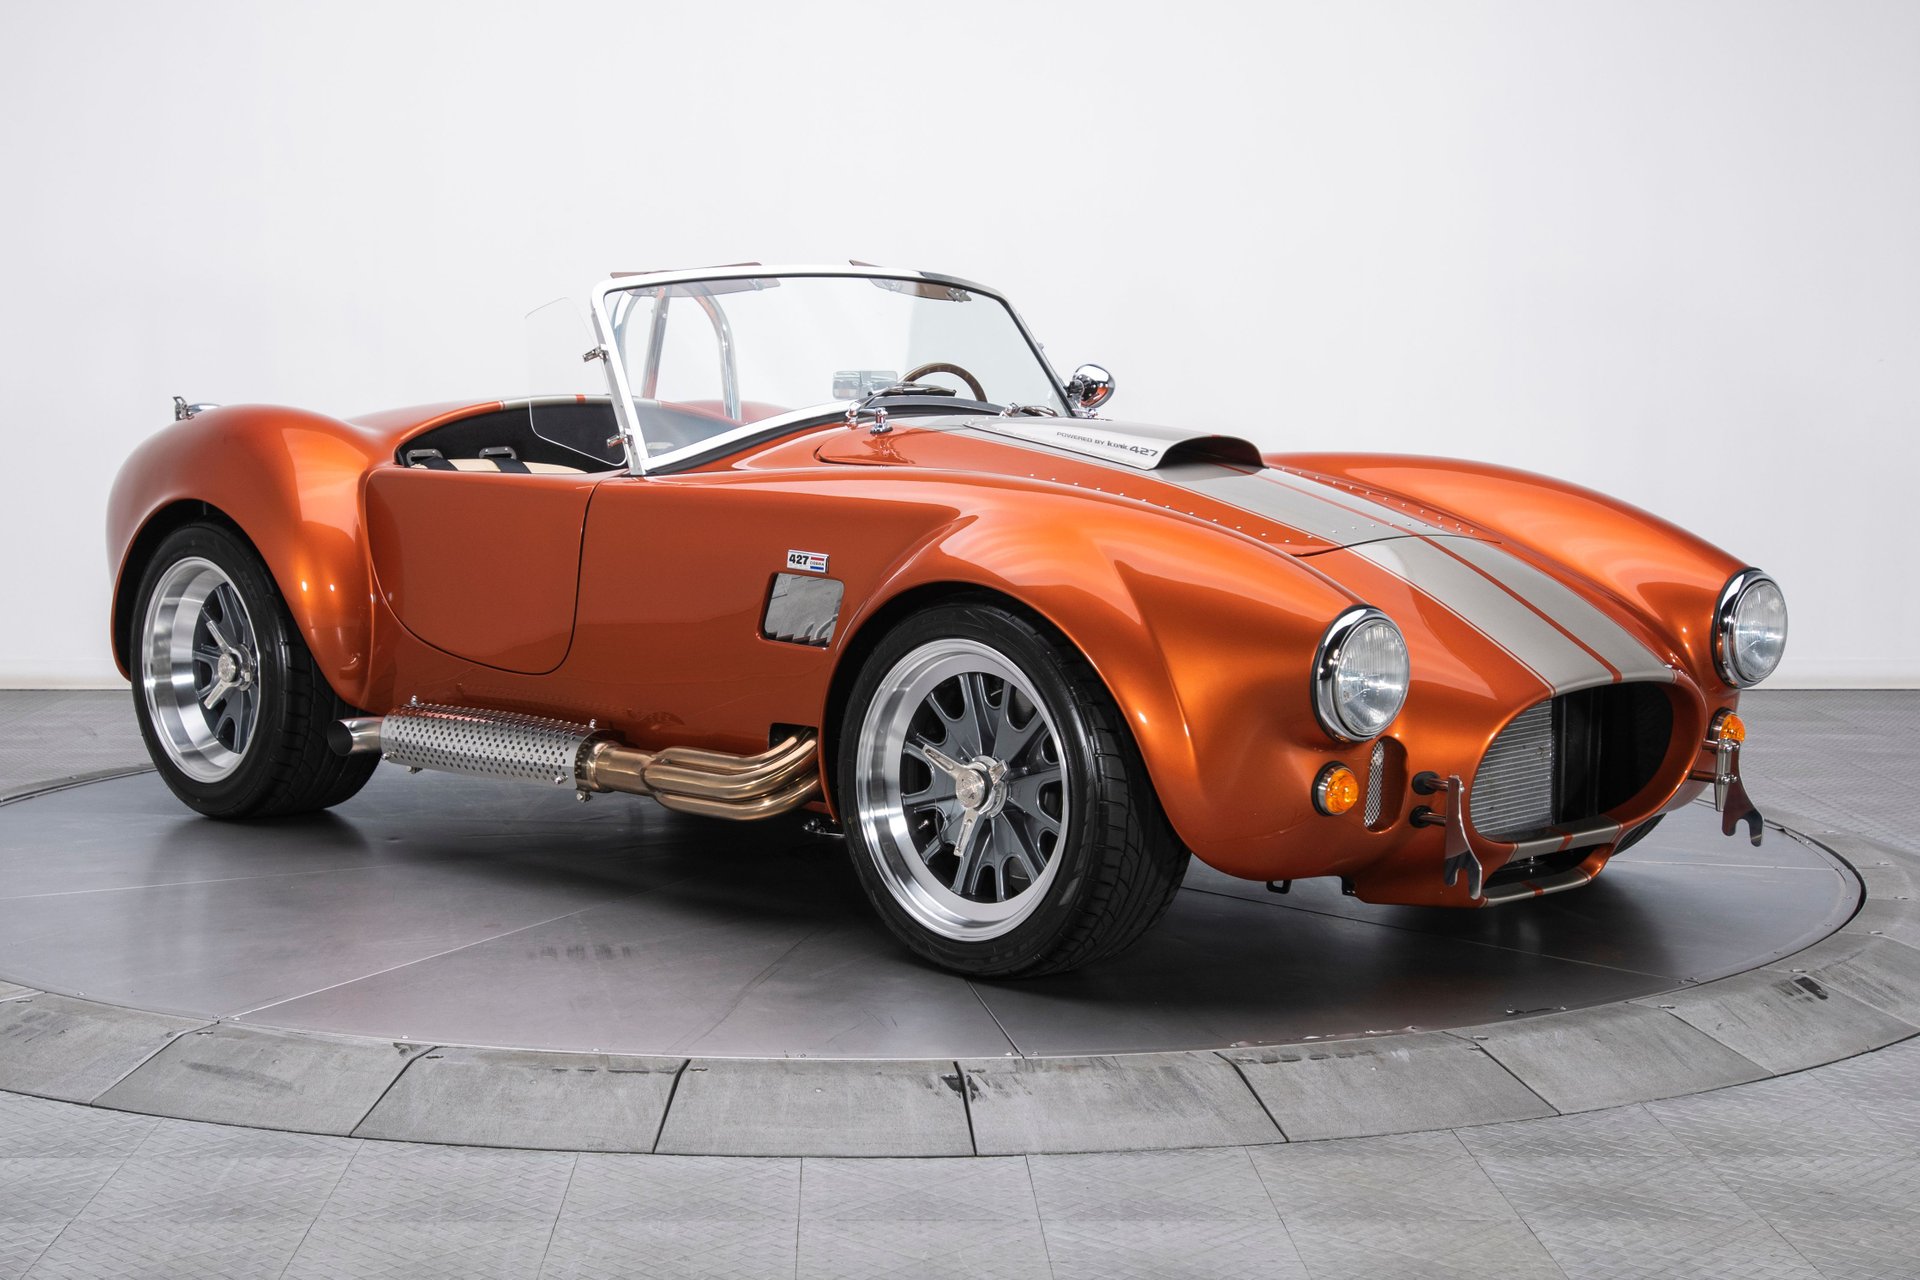 1965 Shelby Cobra 427 Matches V8 Engine With BMW Components - autoevolution